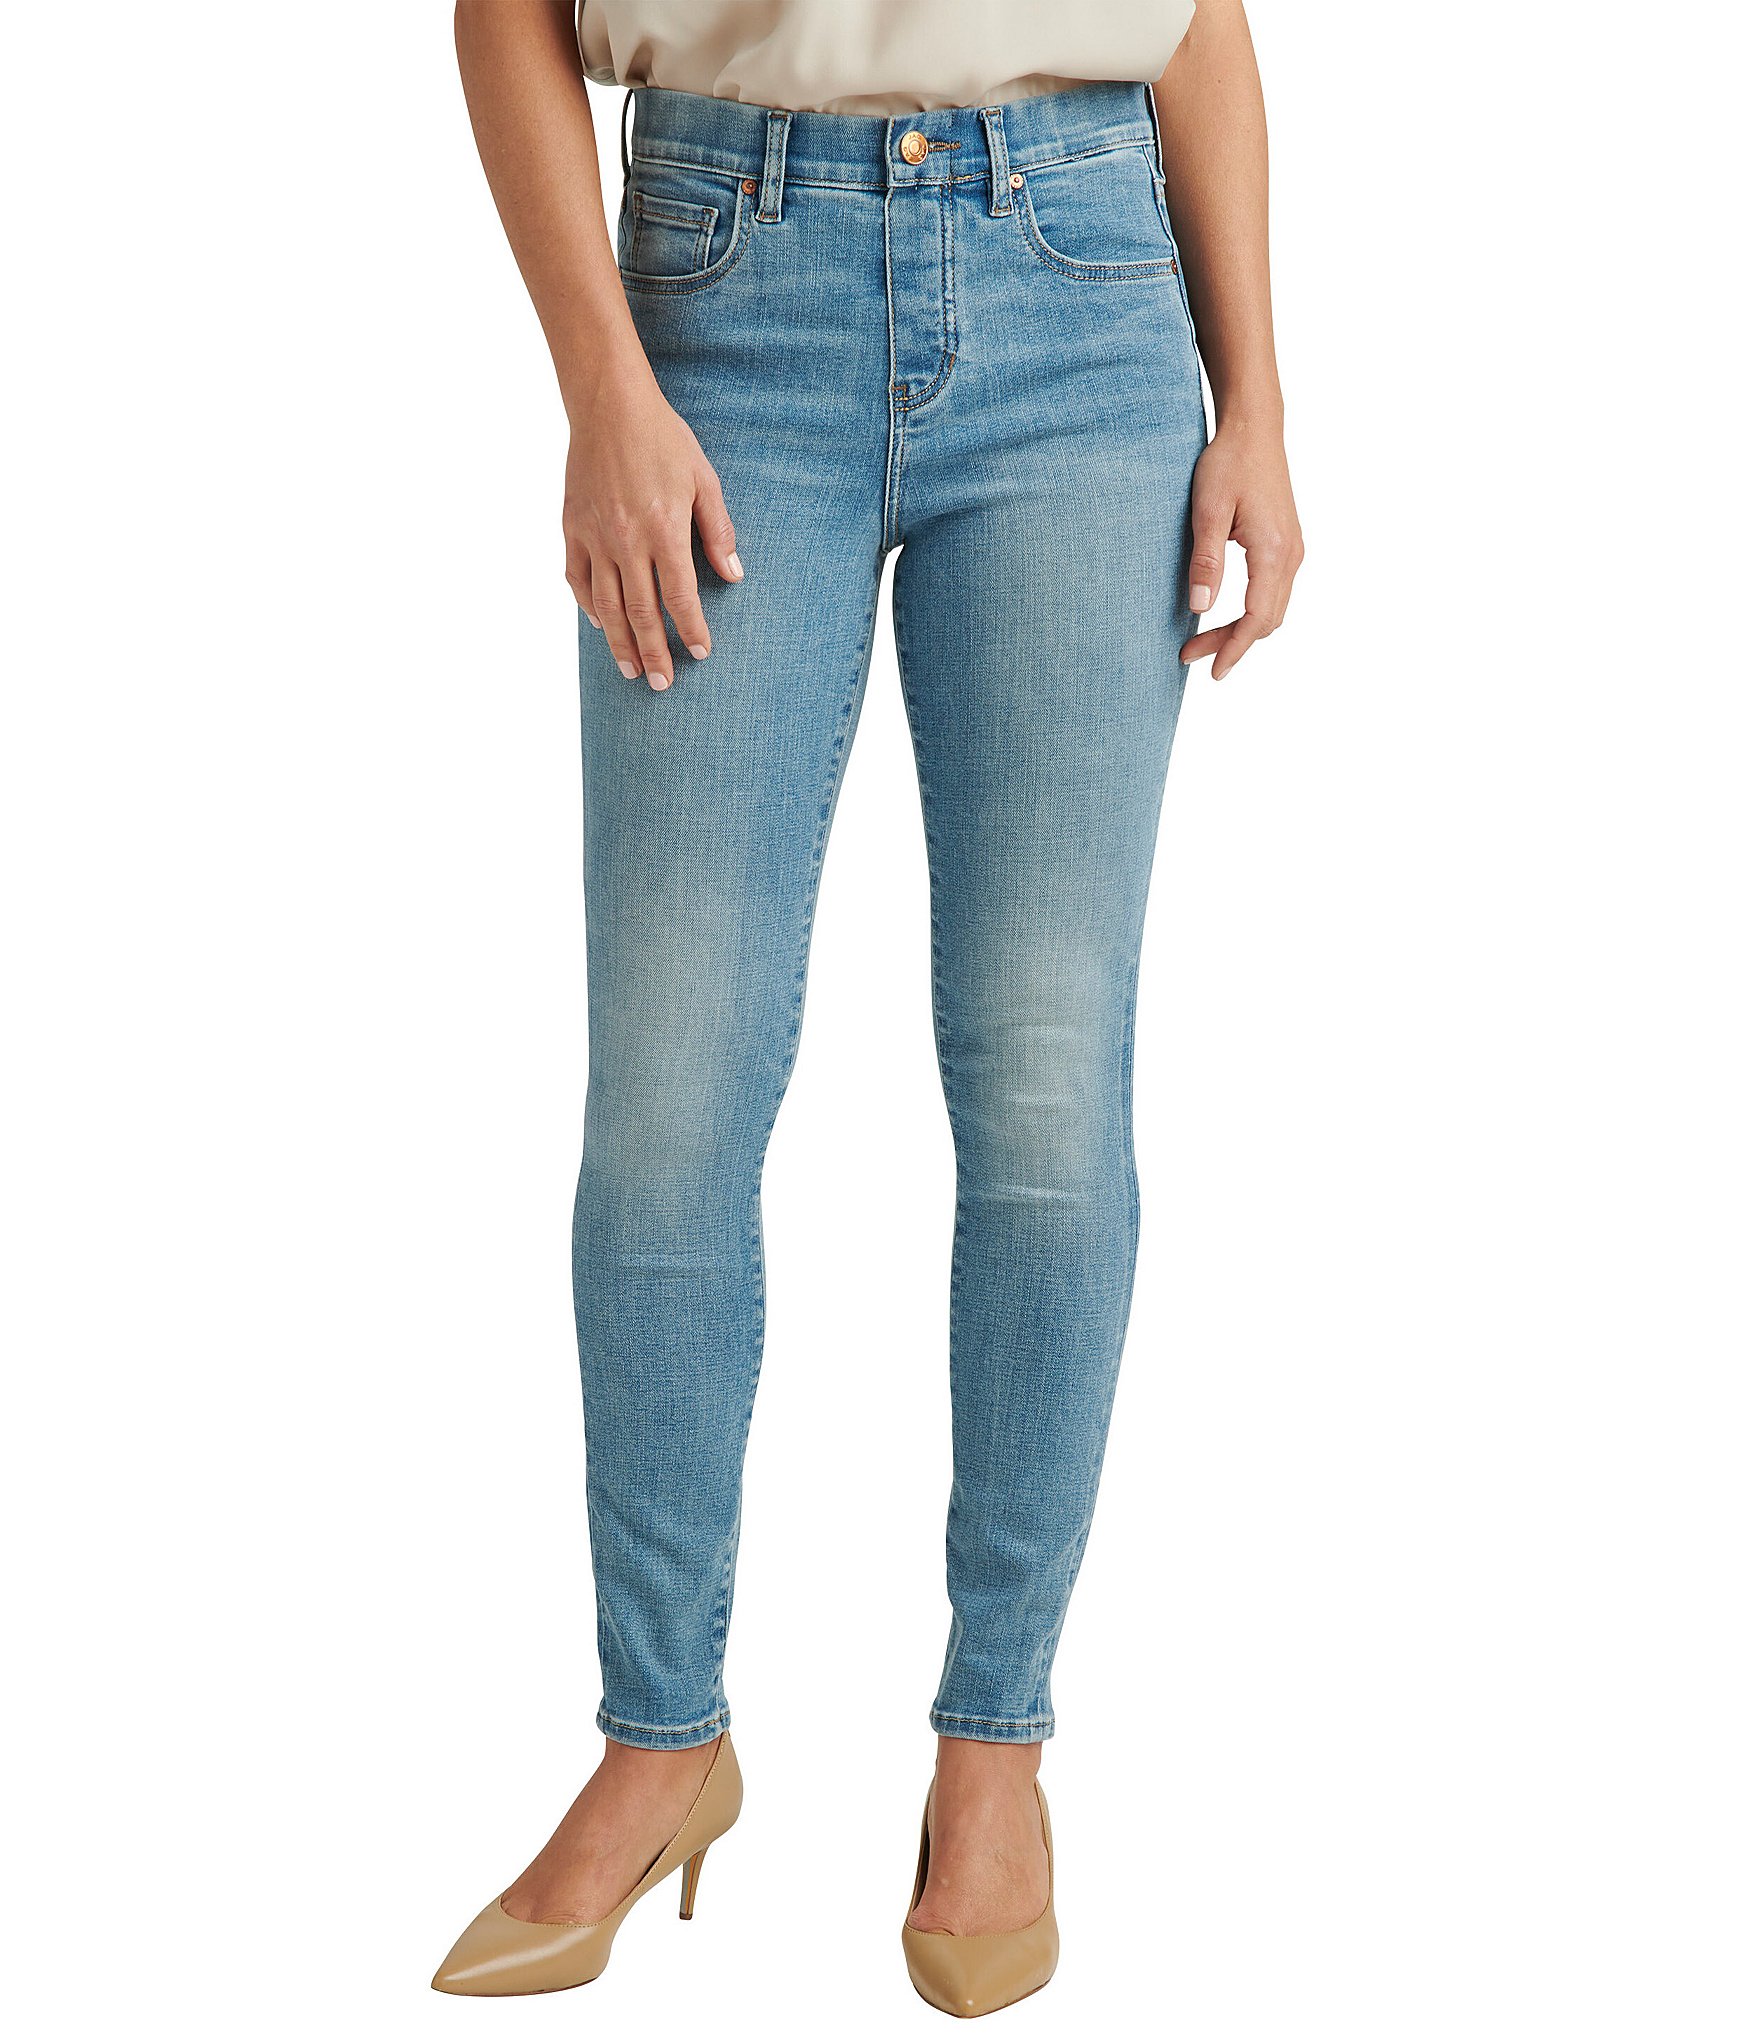 Buy Carter Mid Rise Girlfriend Jeans for USD 74.00